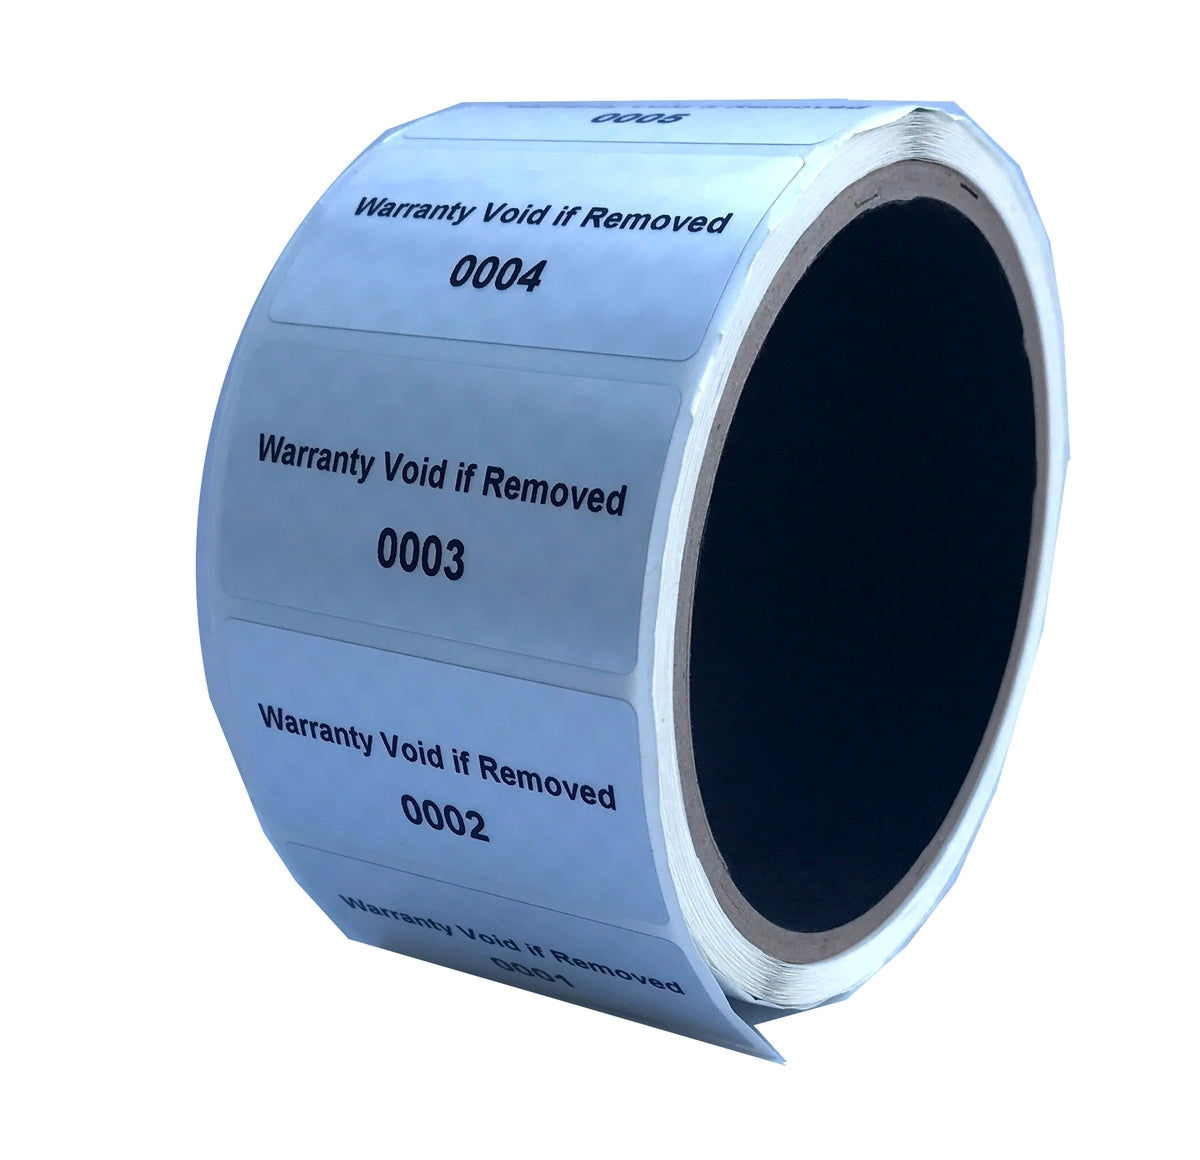 2,000 Tamper Evident Metallic Silver Matte Non Residue Security Labels TamperGuard® Seal Sticker, Rectangle 2" x 1" (51mm x 25mm). Printed: Warranty Void if Removed + Serialized